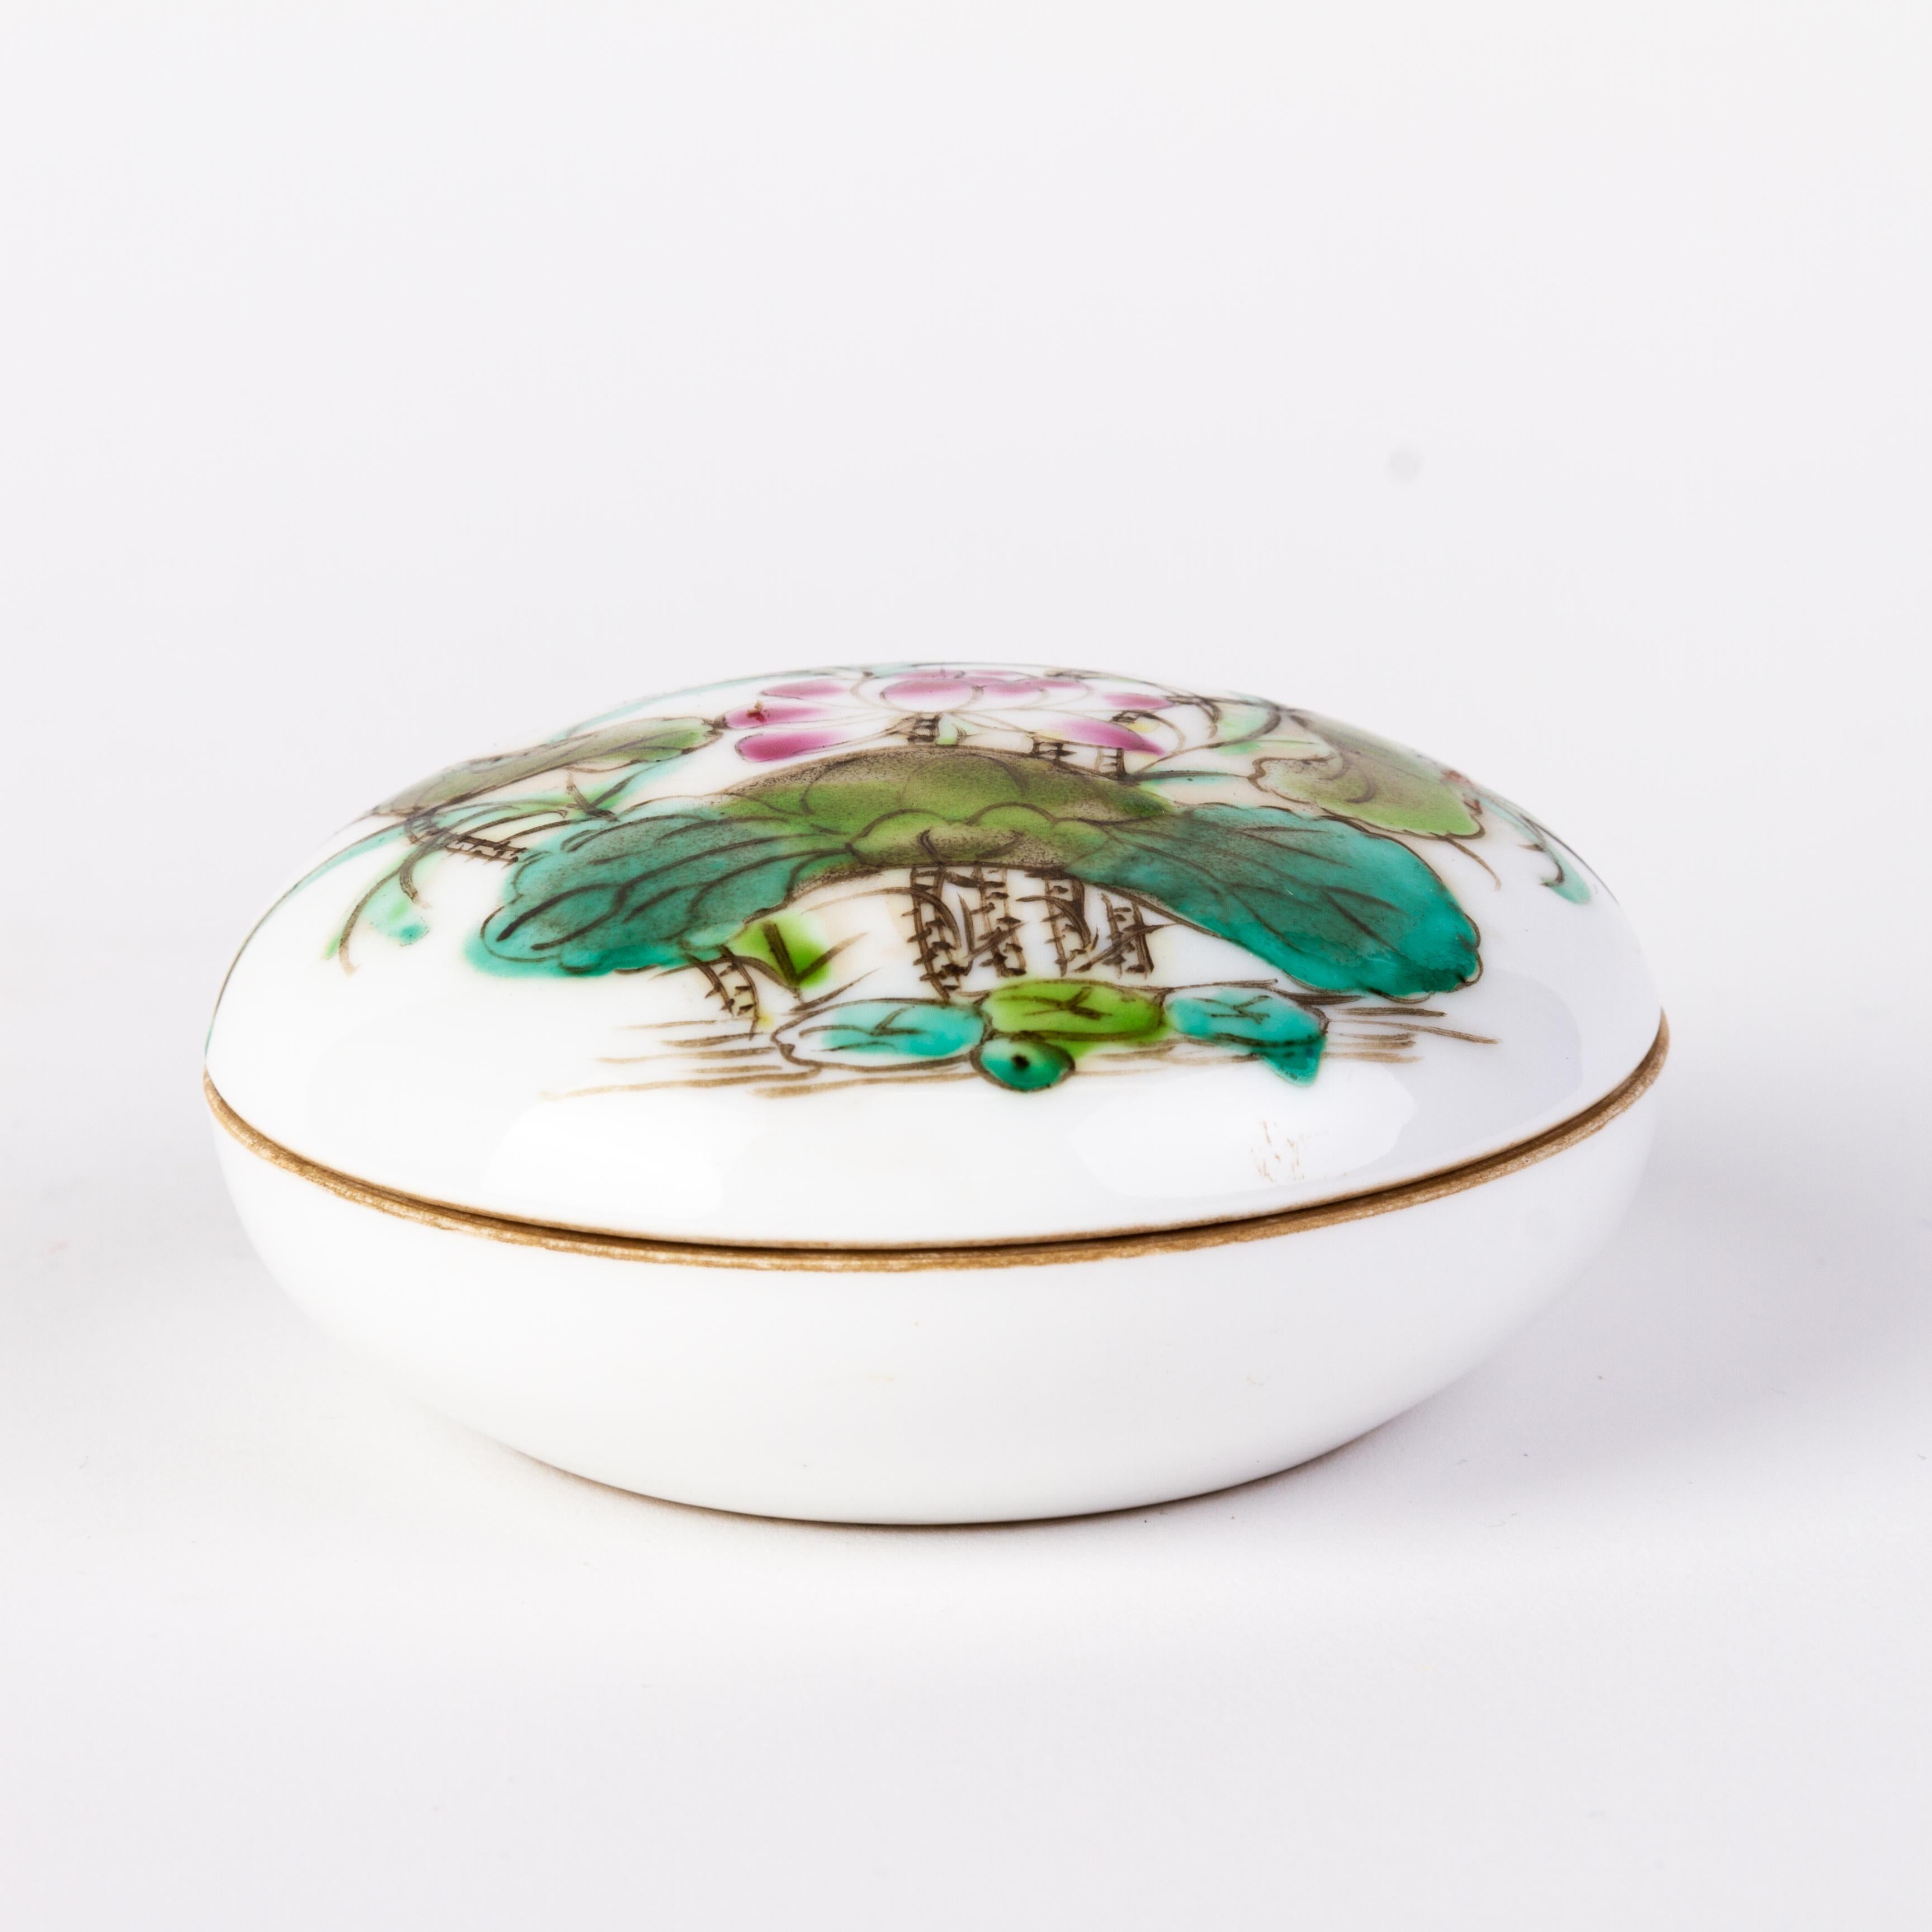 Chinese Republic Period Famille Rose Porcelain Lidded Box with Seal Mark For Sale 3